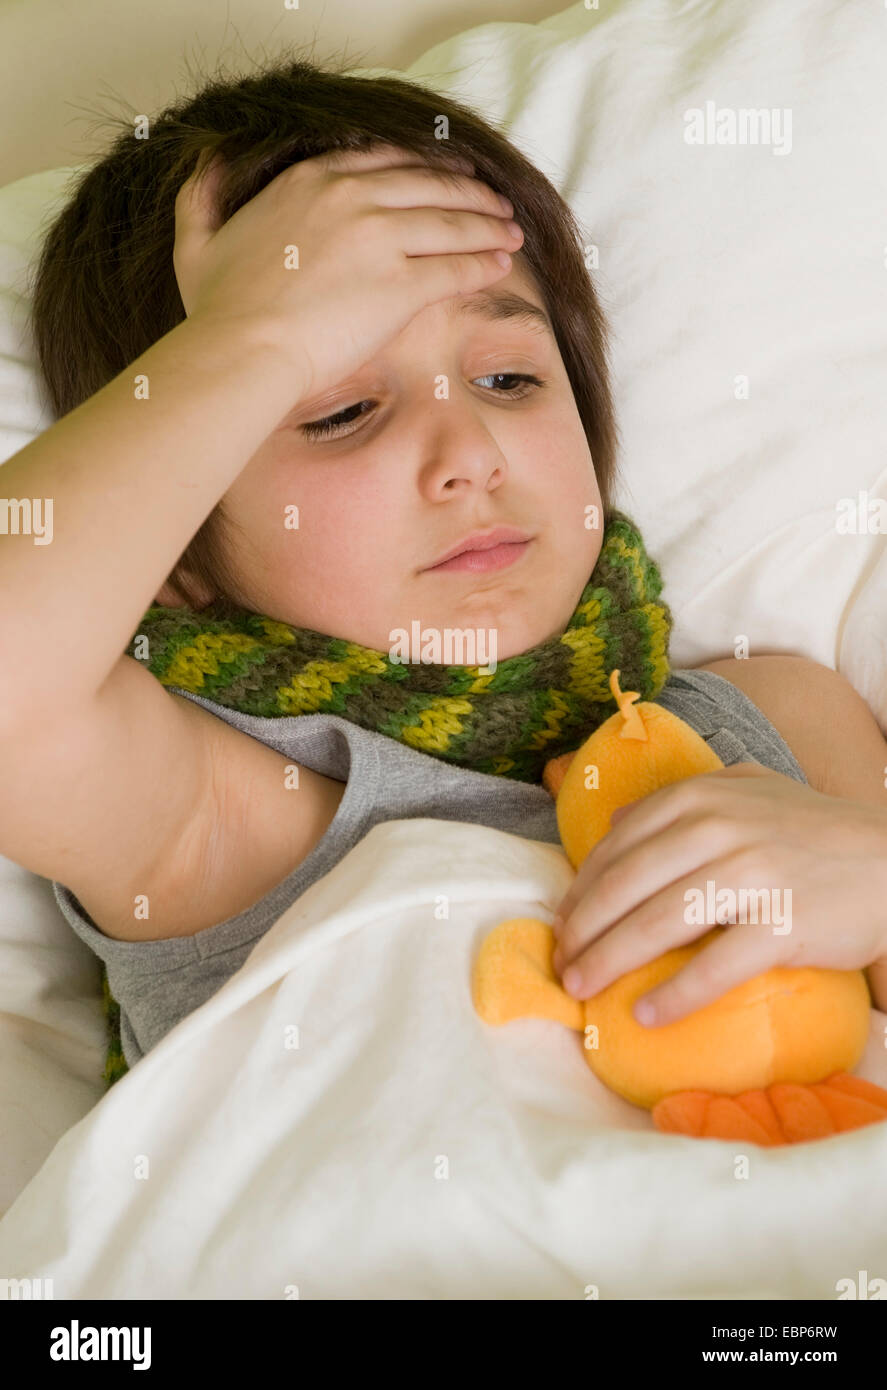 sick boy in bed Stock Photo